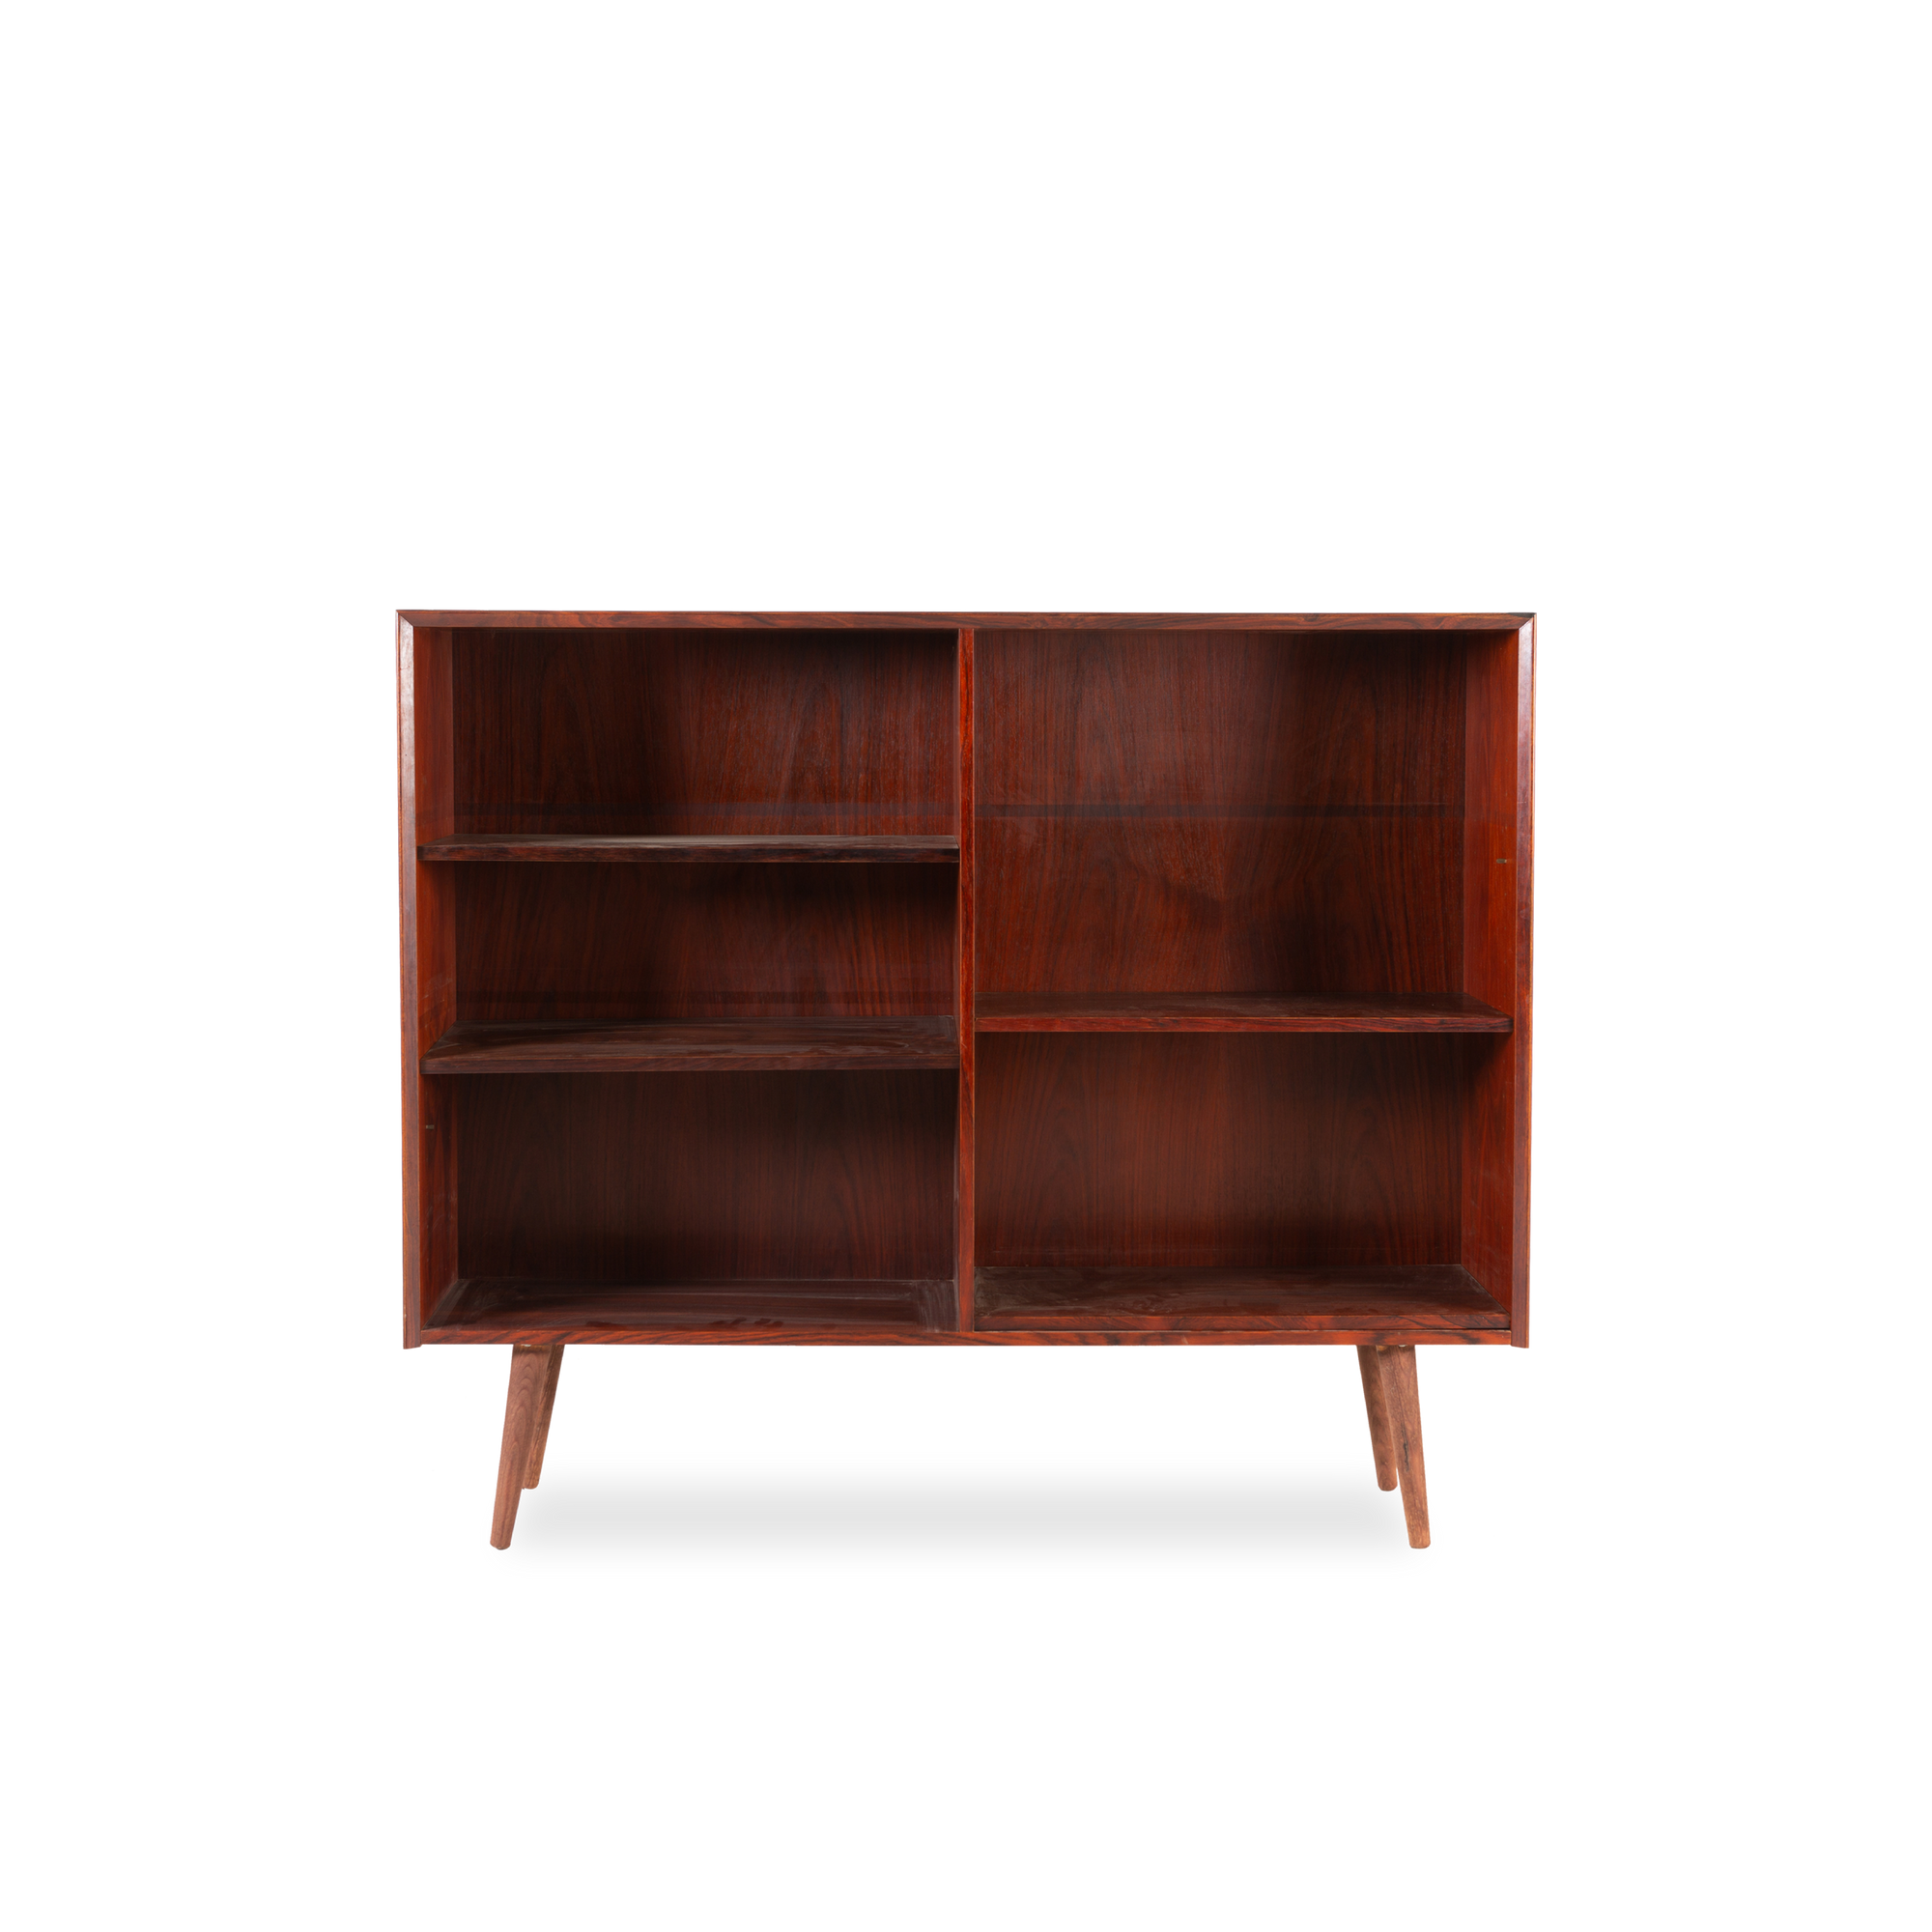 A beautiful display of rich aged rosewood, this vintage bookcase was designed by Erik Brouer for Brouer Mobelfabrik, Denmark.